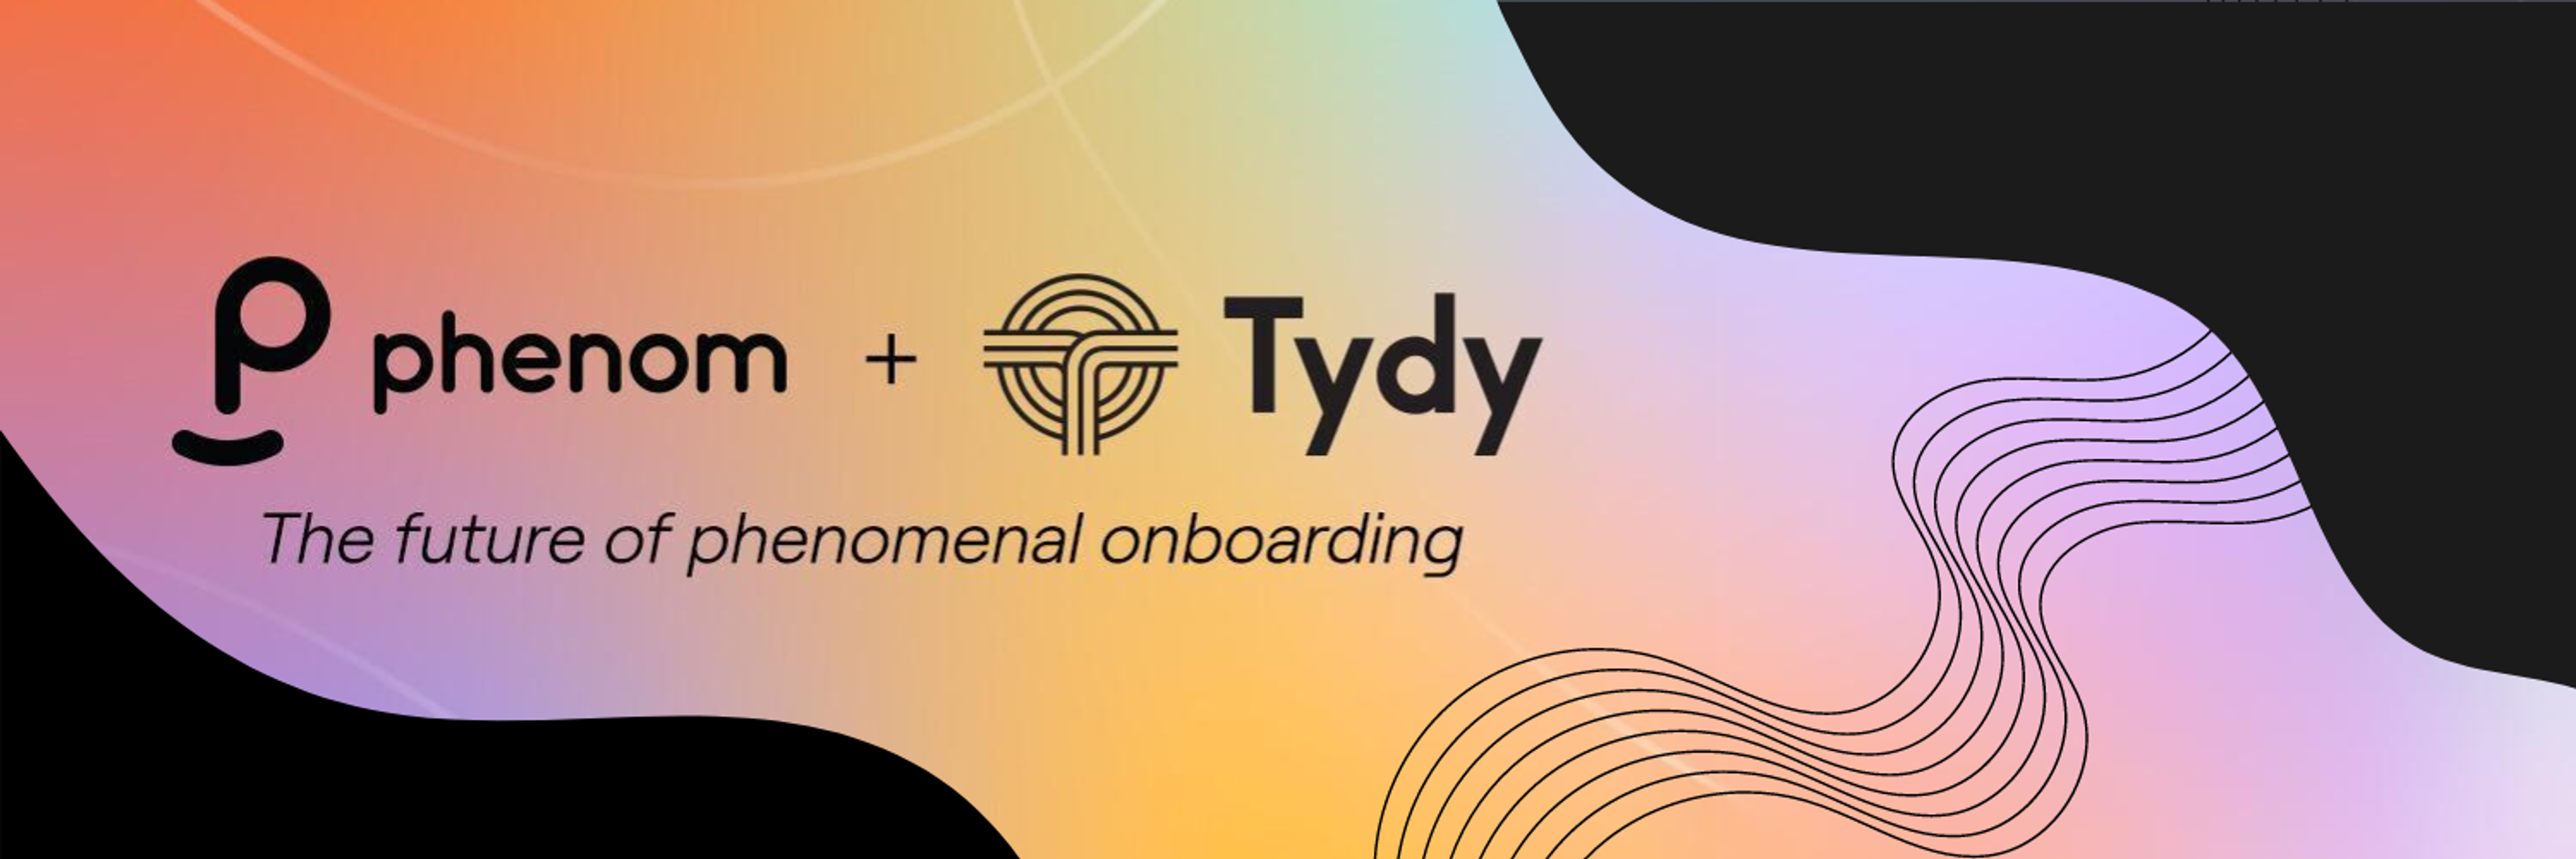 The image is a wide banner showcasing the branding and merger announcement between Phenom and Tydy. It features the logos of both companies with the phrase "Phenom + Tydy" prominently displayed in the center. The tagline "The future of phenomenal onboarding" is positioned beneath the logos, suggesting a focus on innovative HR solutions. The background blends soft gradients of orange, pink, and purple, overlaid with a wave-like pattern in white, adding a modern, dynamic look to the design.